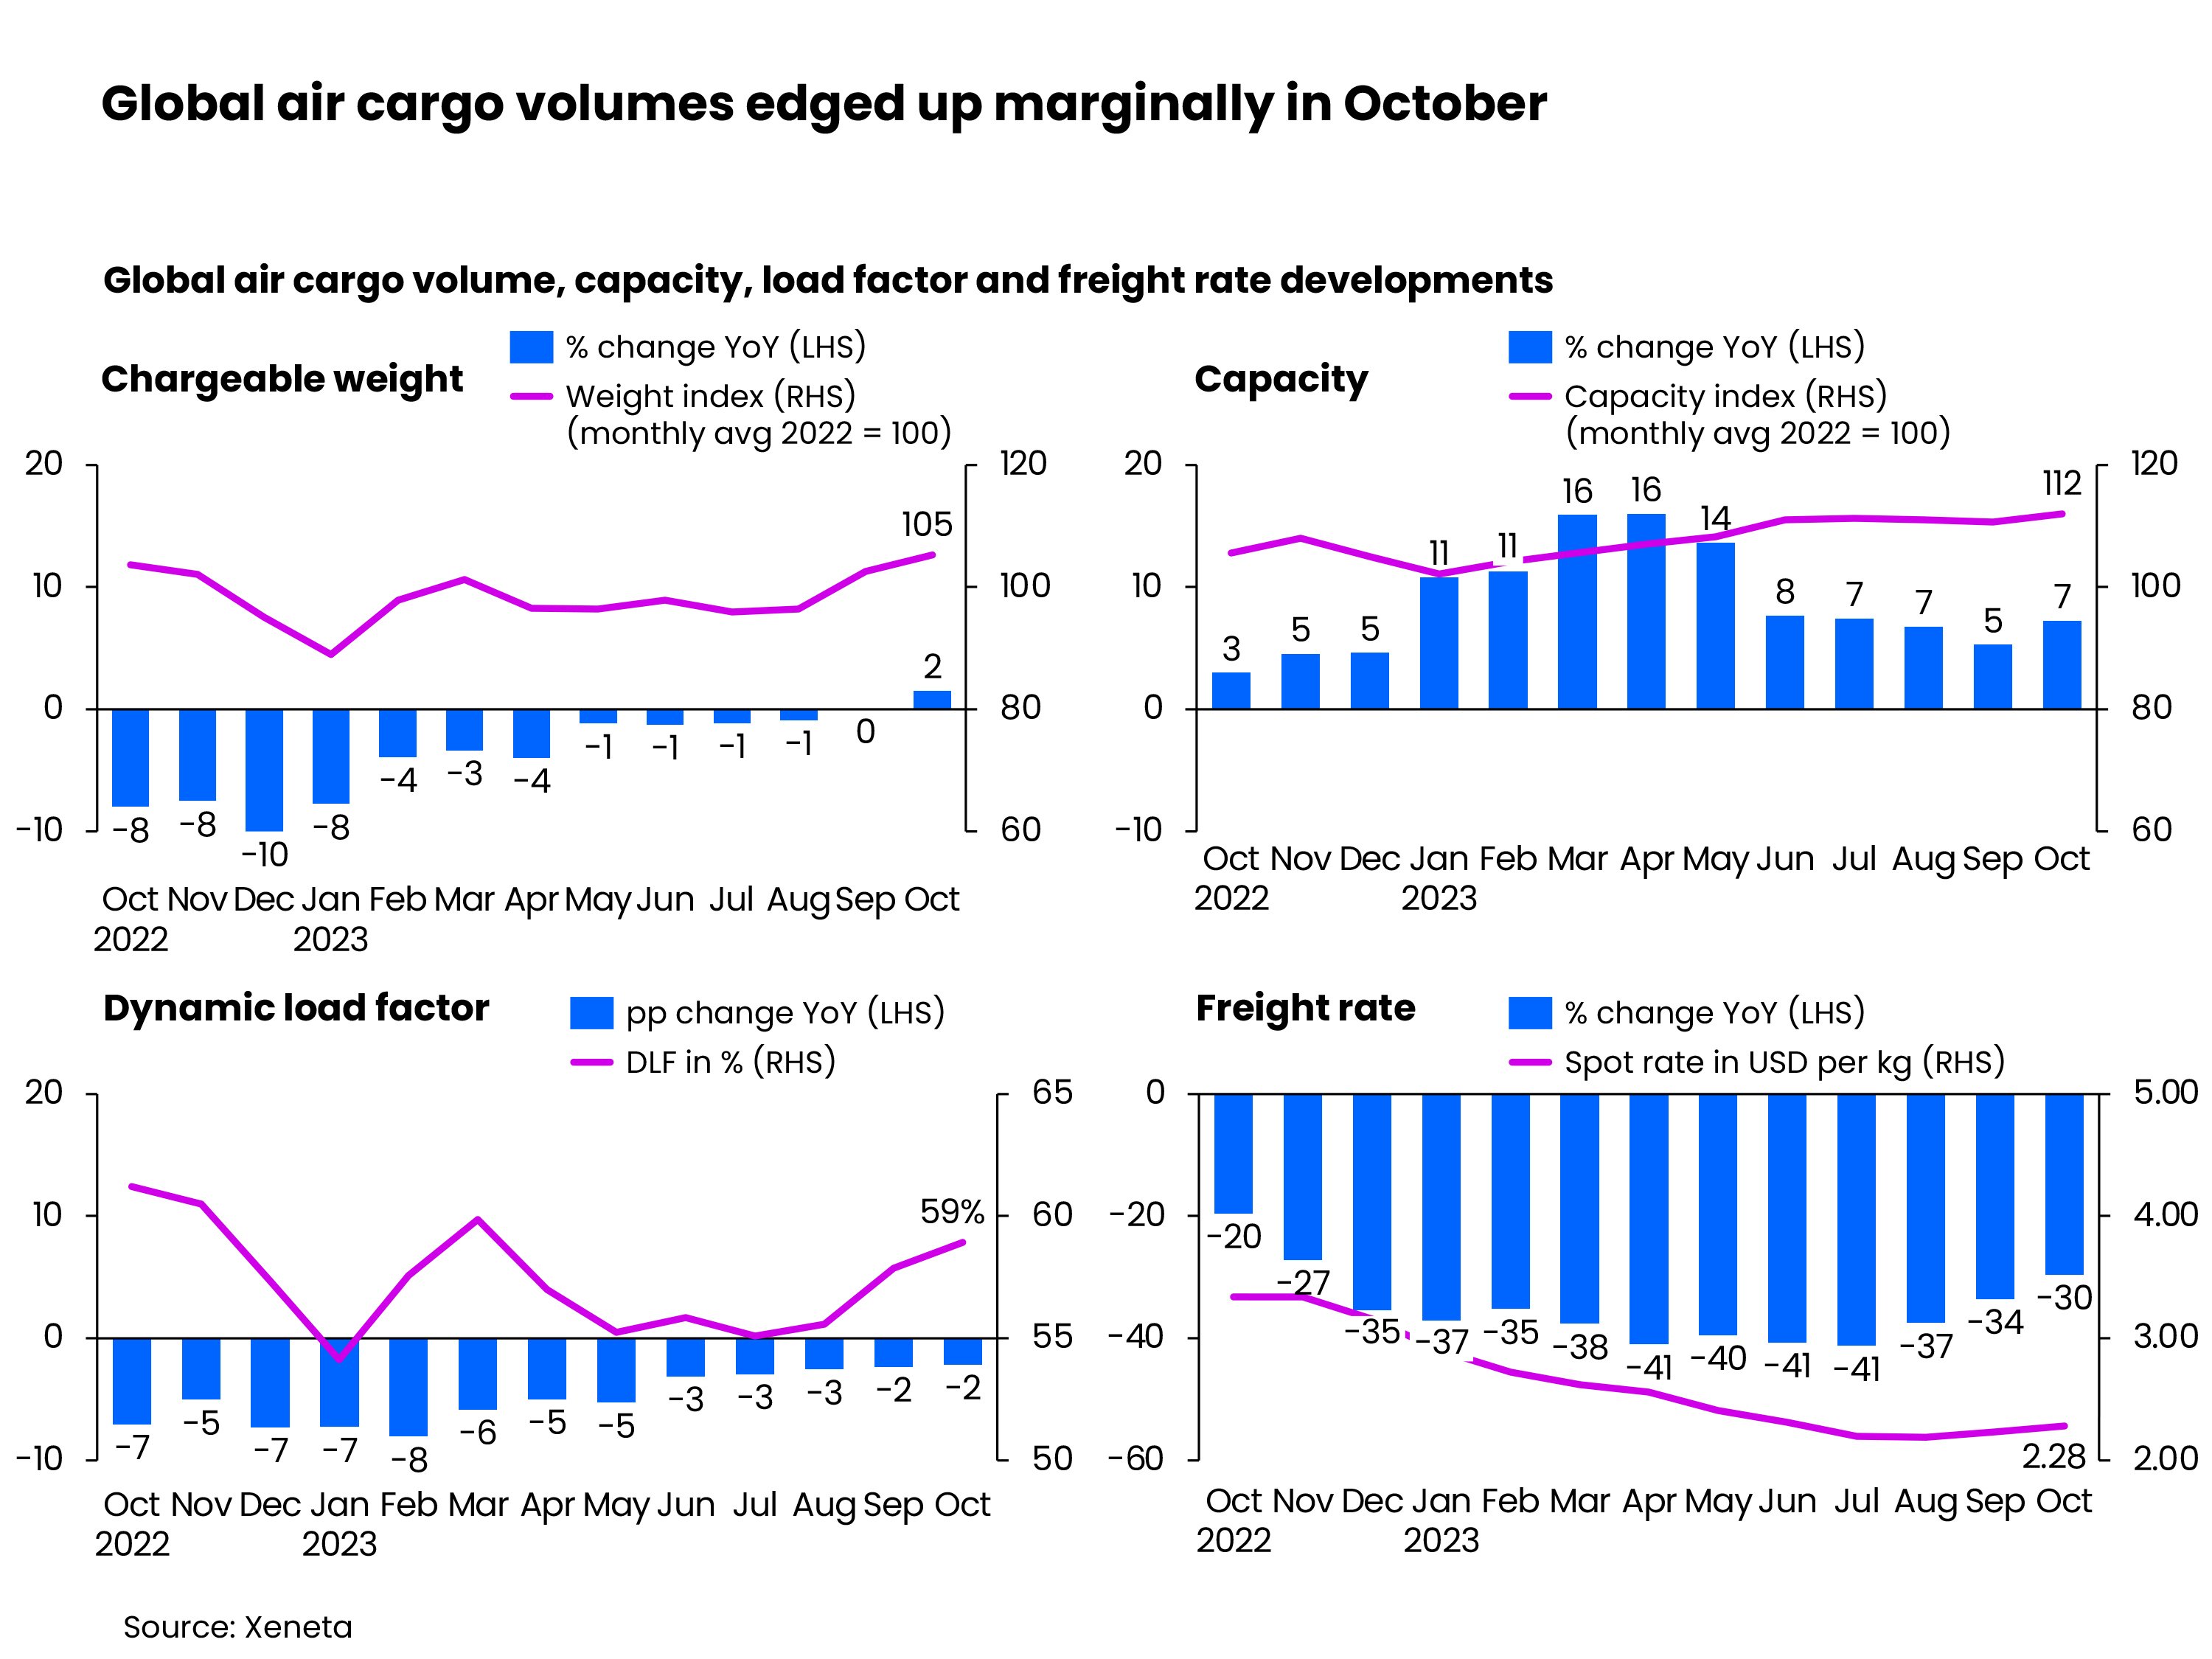 Global air cargo demand edged up globally in October  